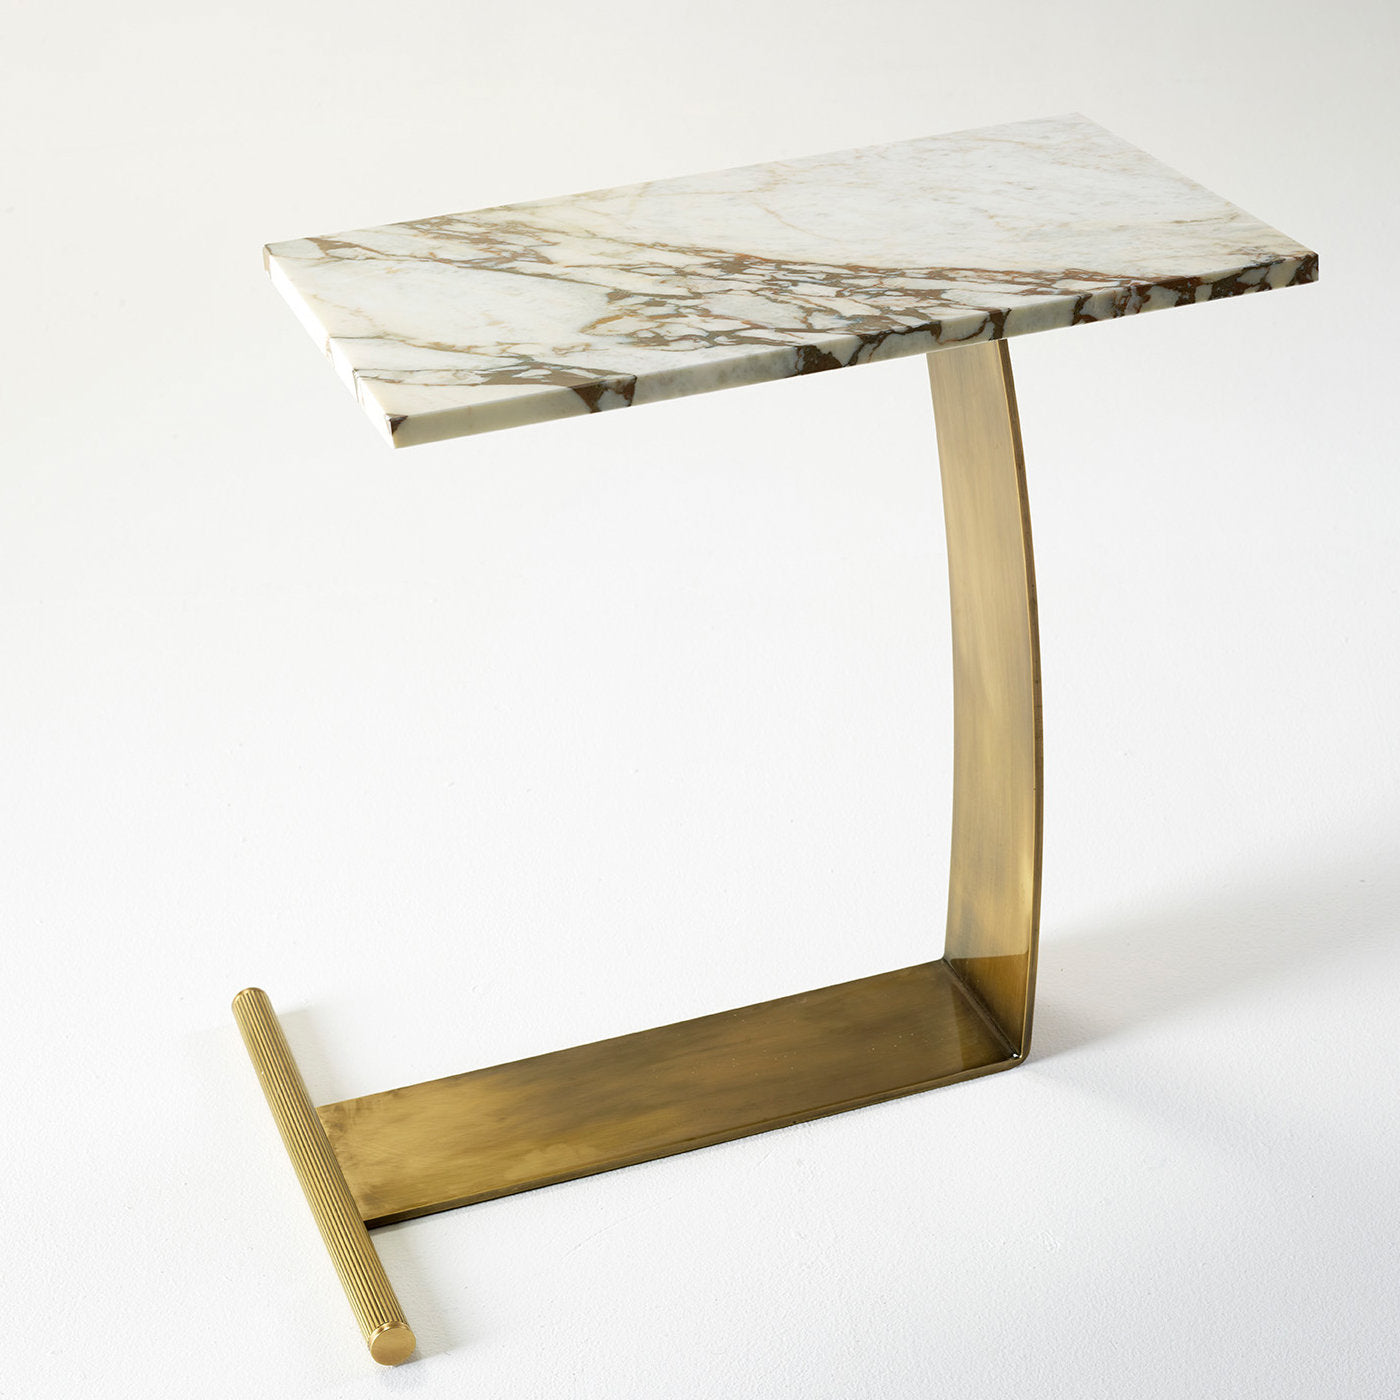 Guy Marble Table - Alternative view 3